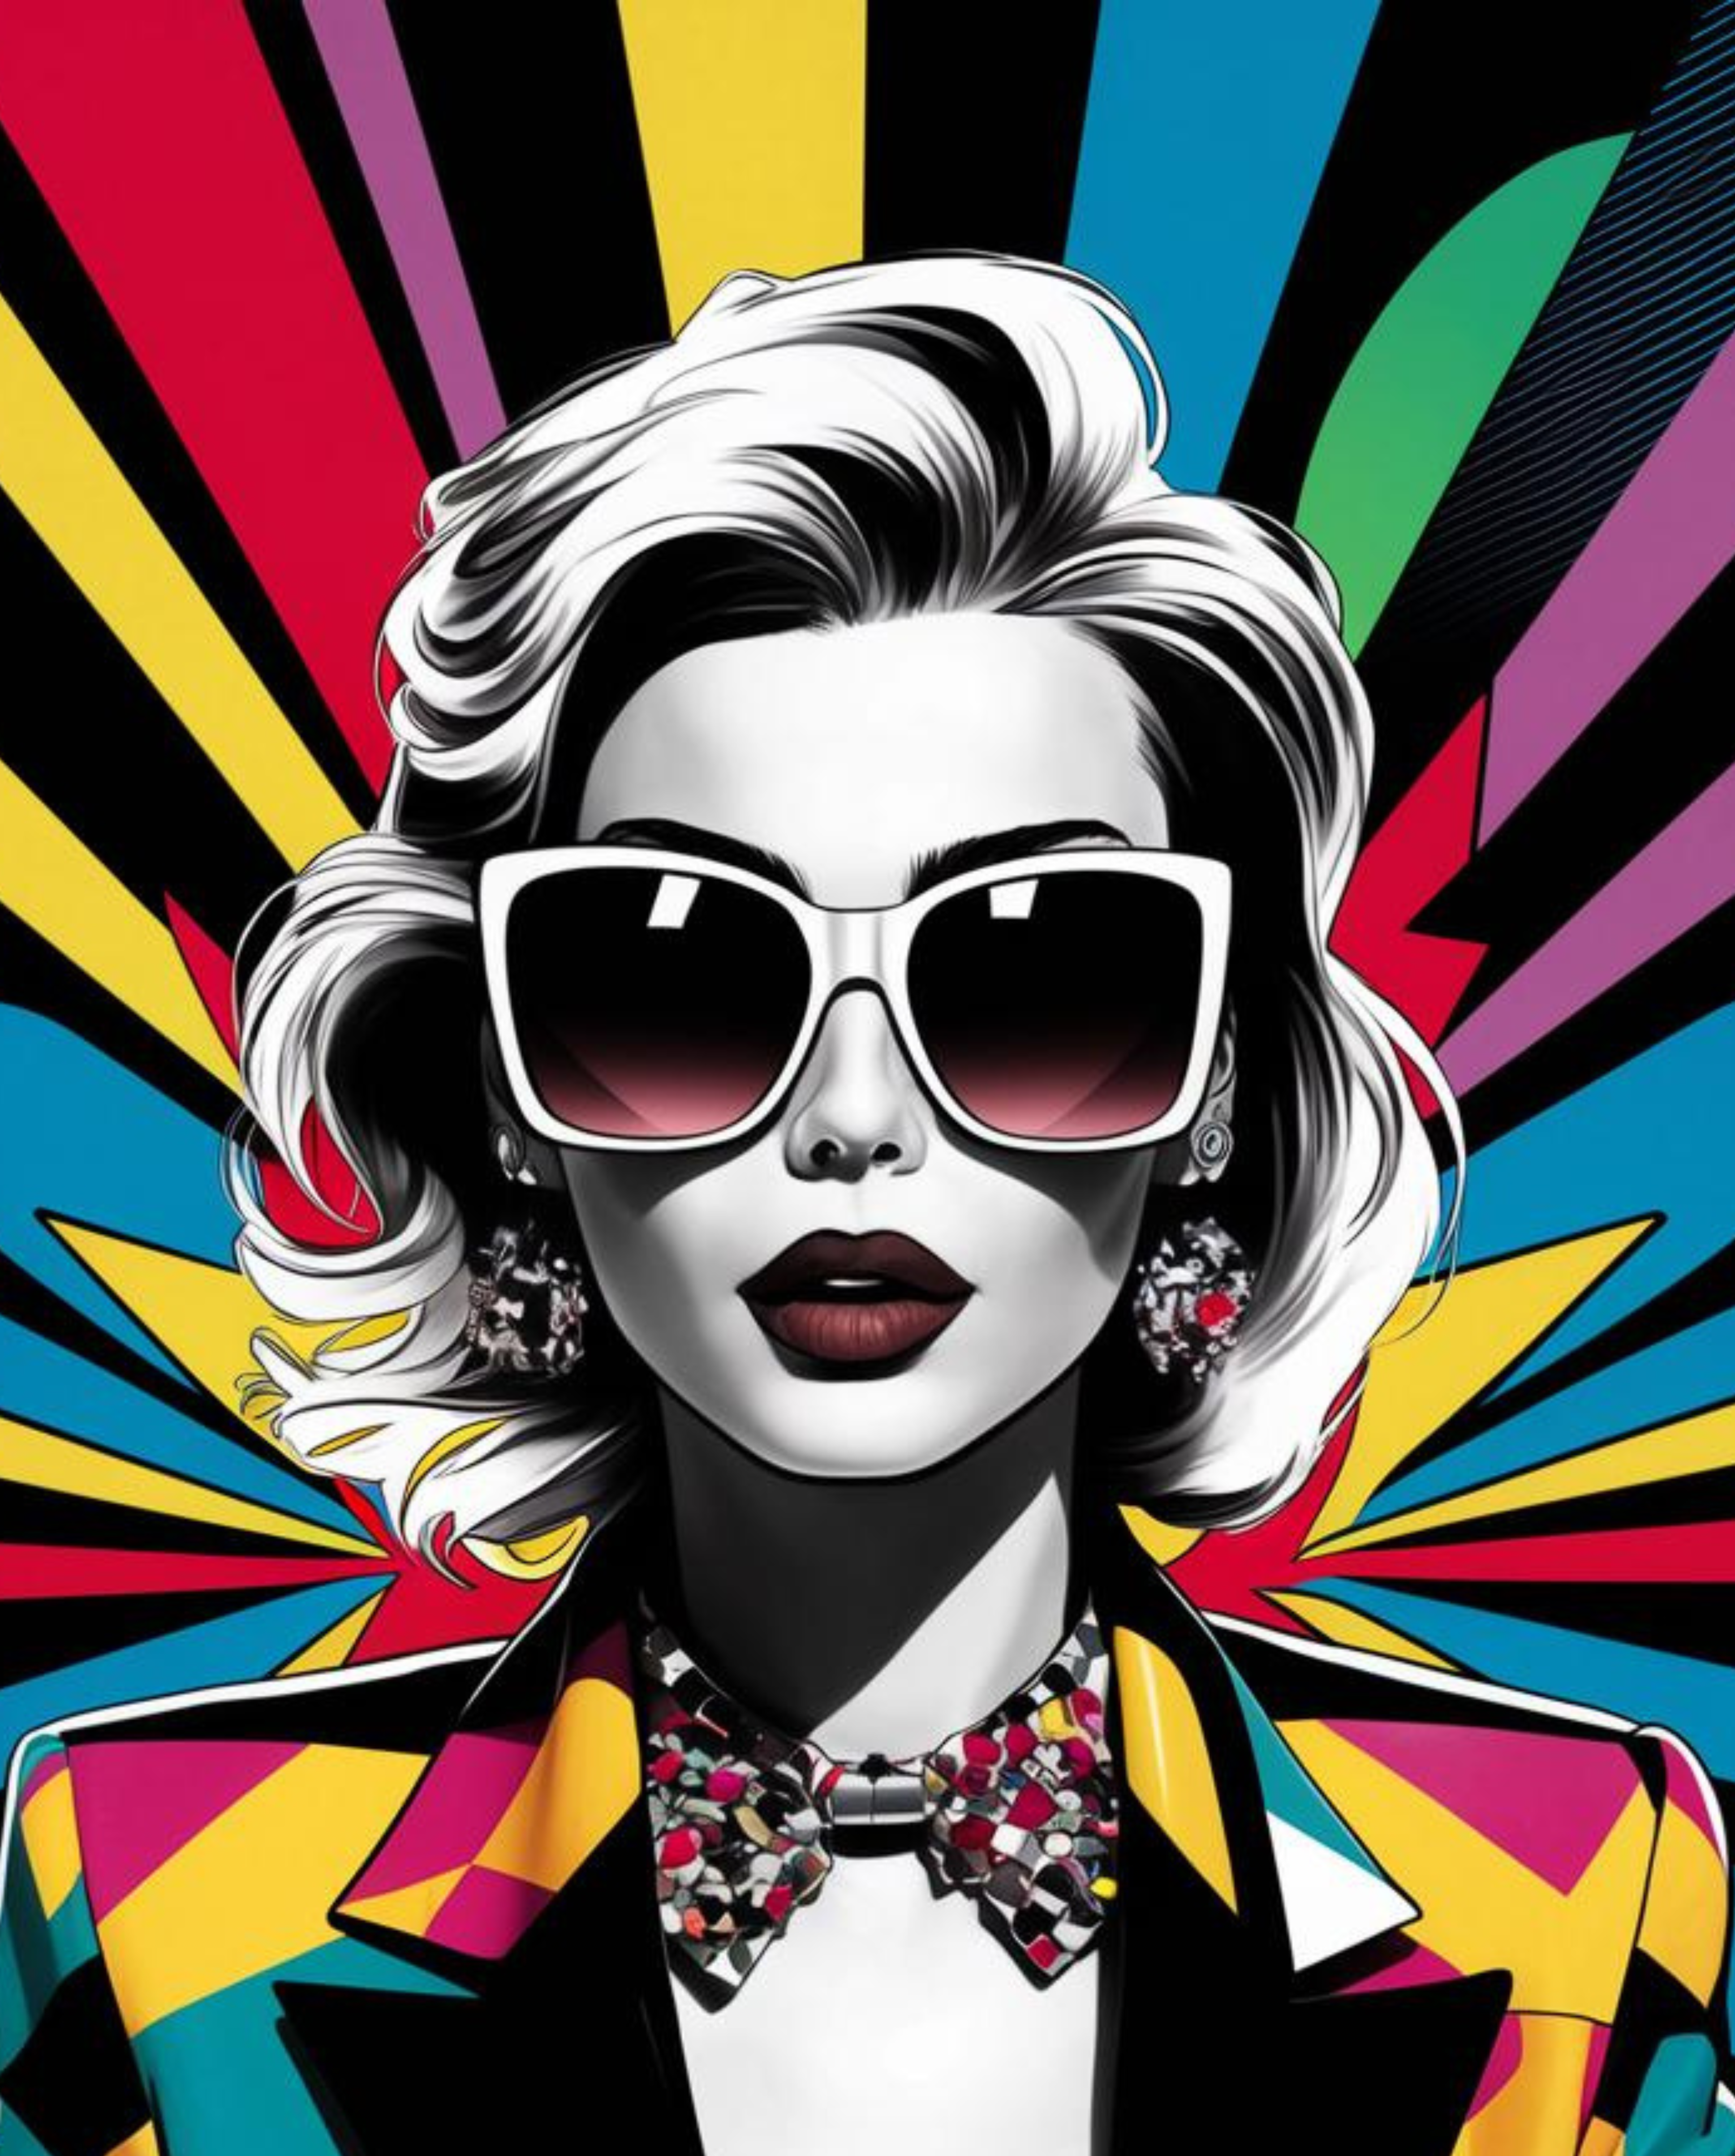 a woman wearing sunglasses and a colorful background